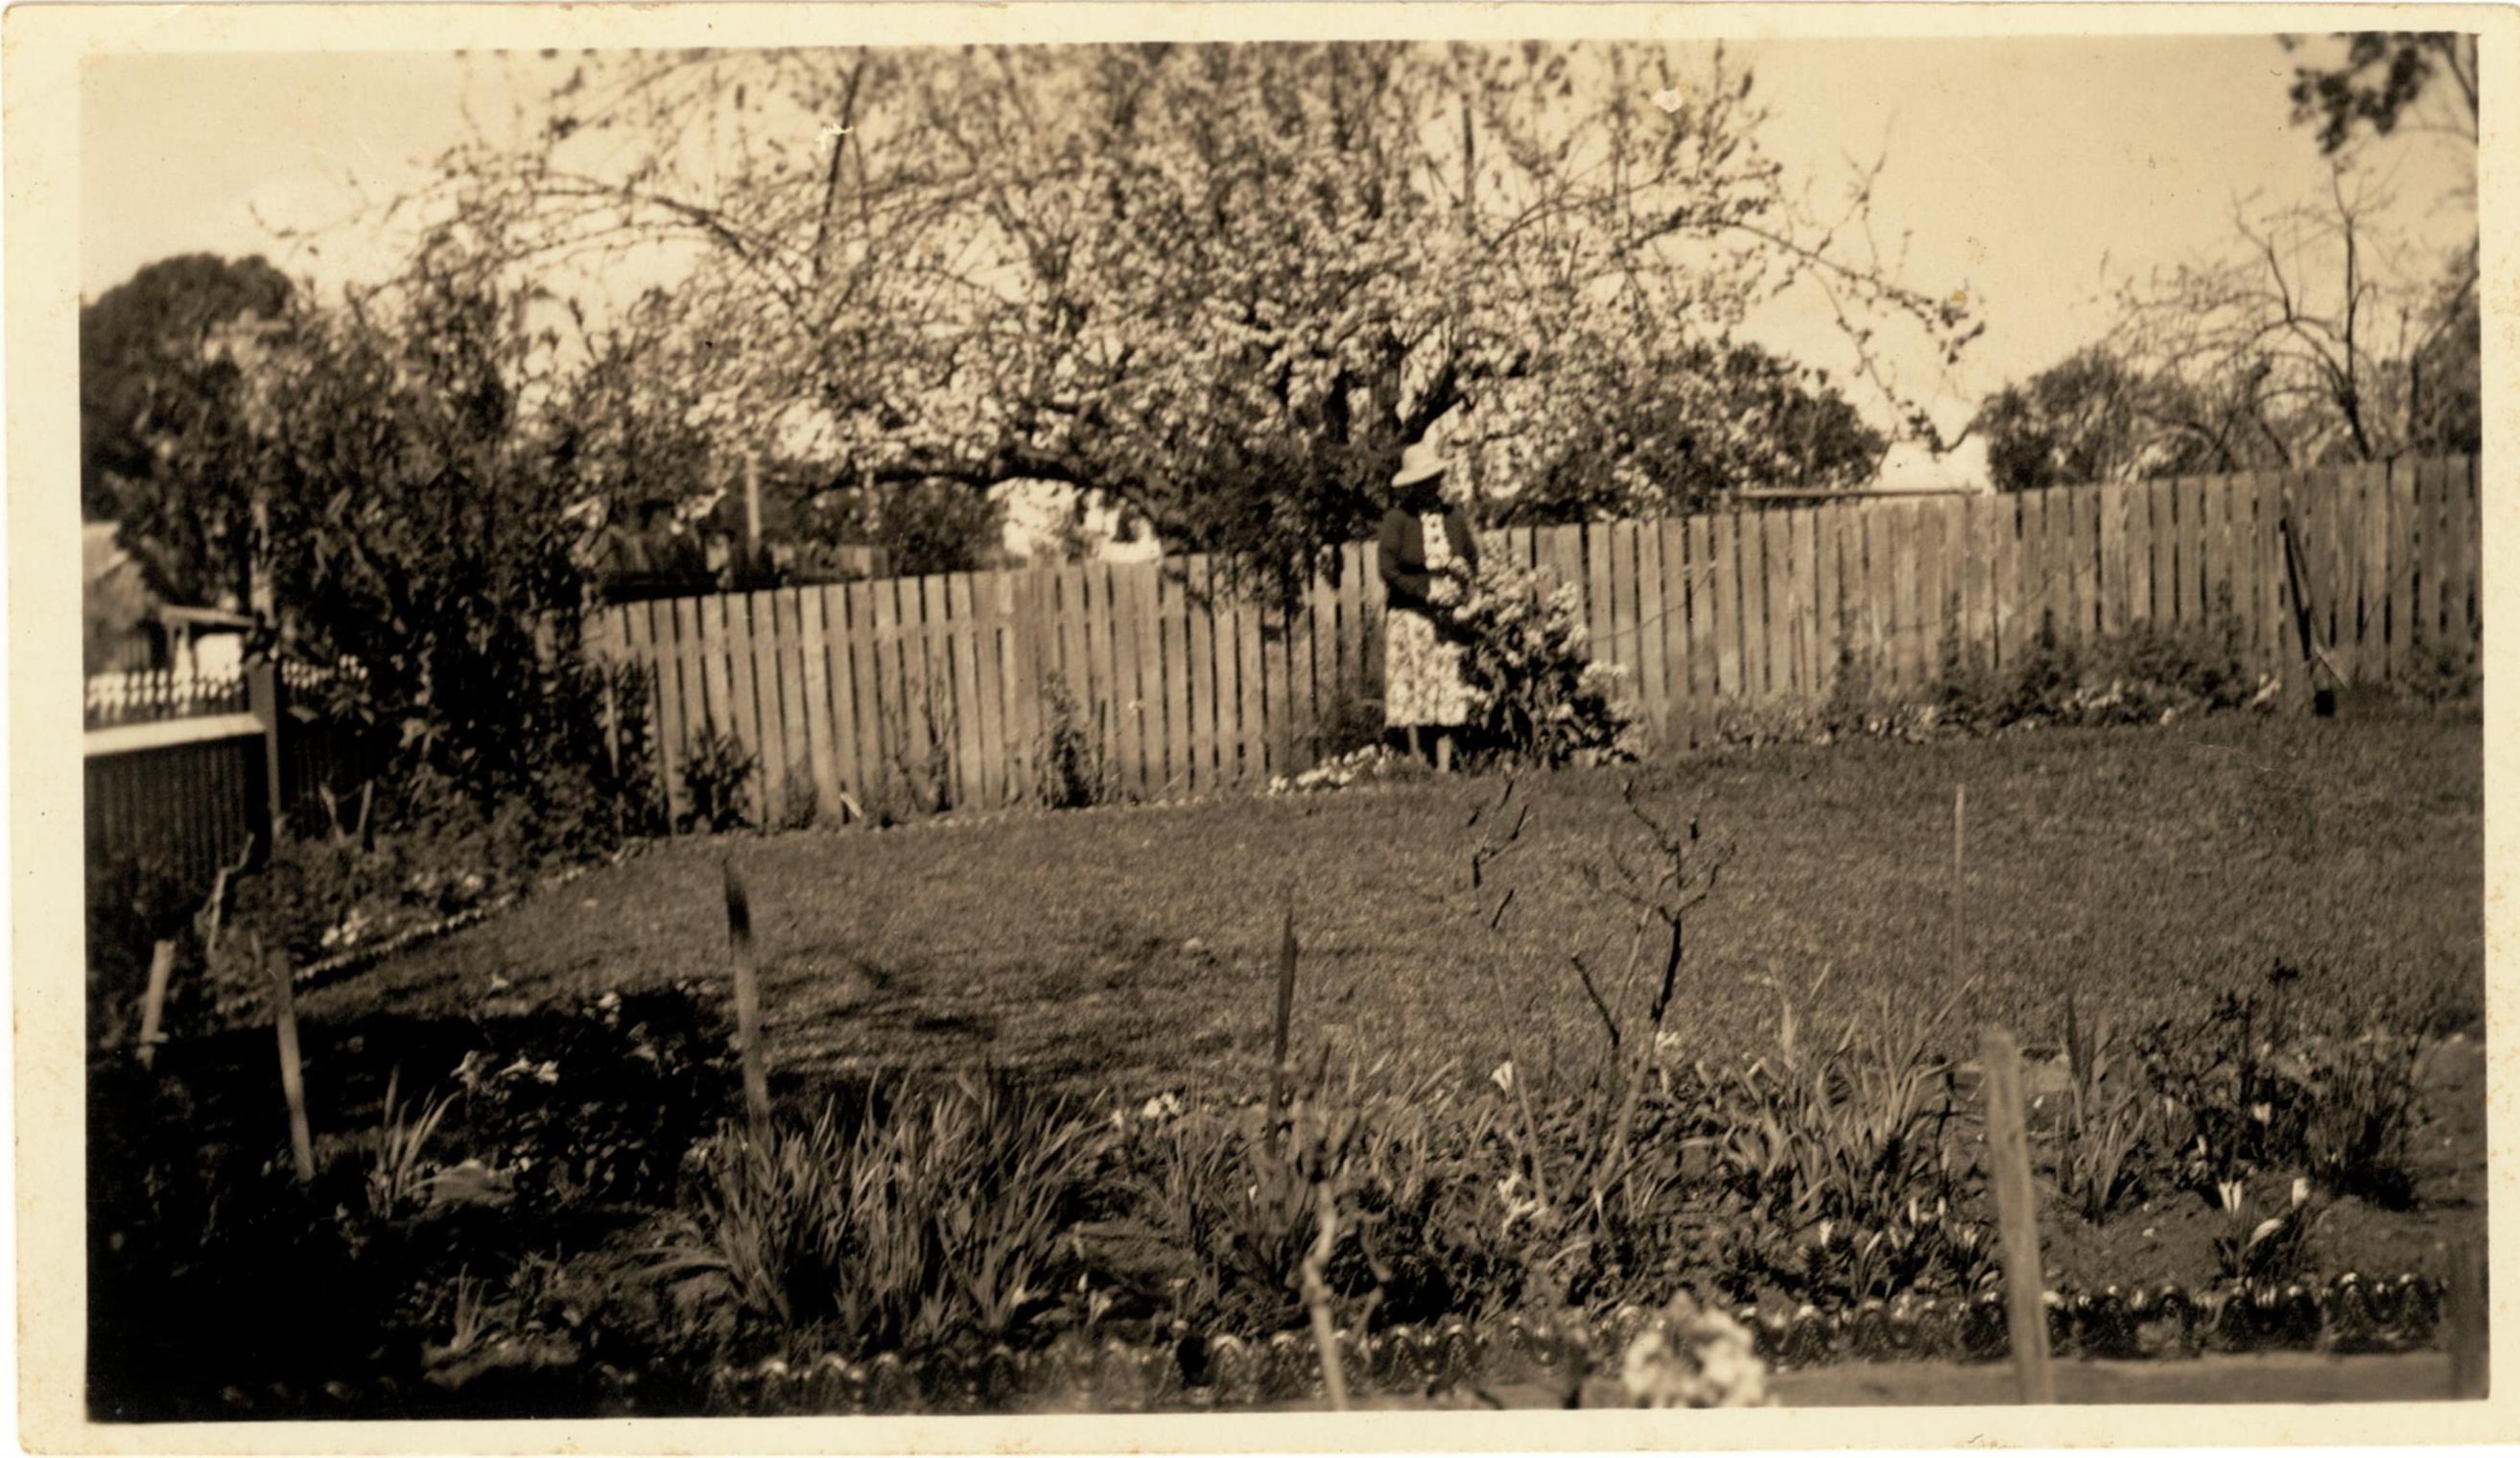 Helen Macgregor in the front of the orchard fence at Meroogal, Nowra, around 1930 / photographer unknown